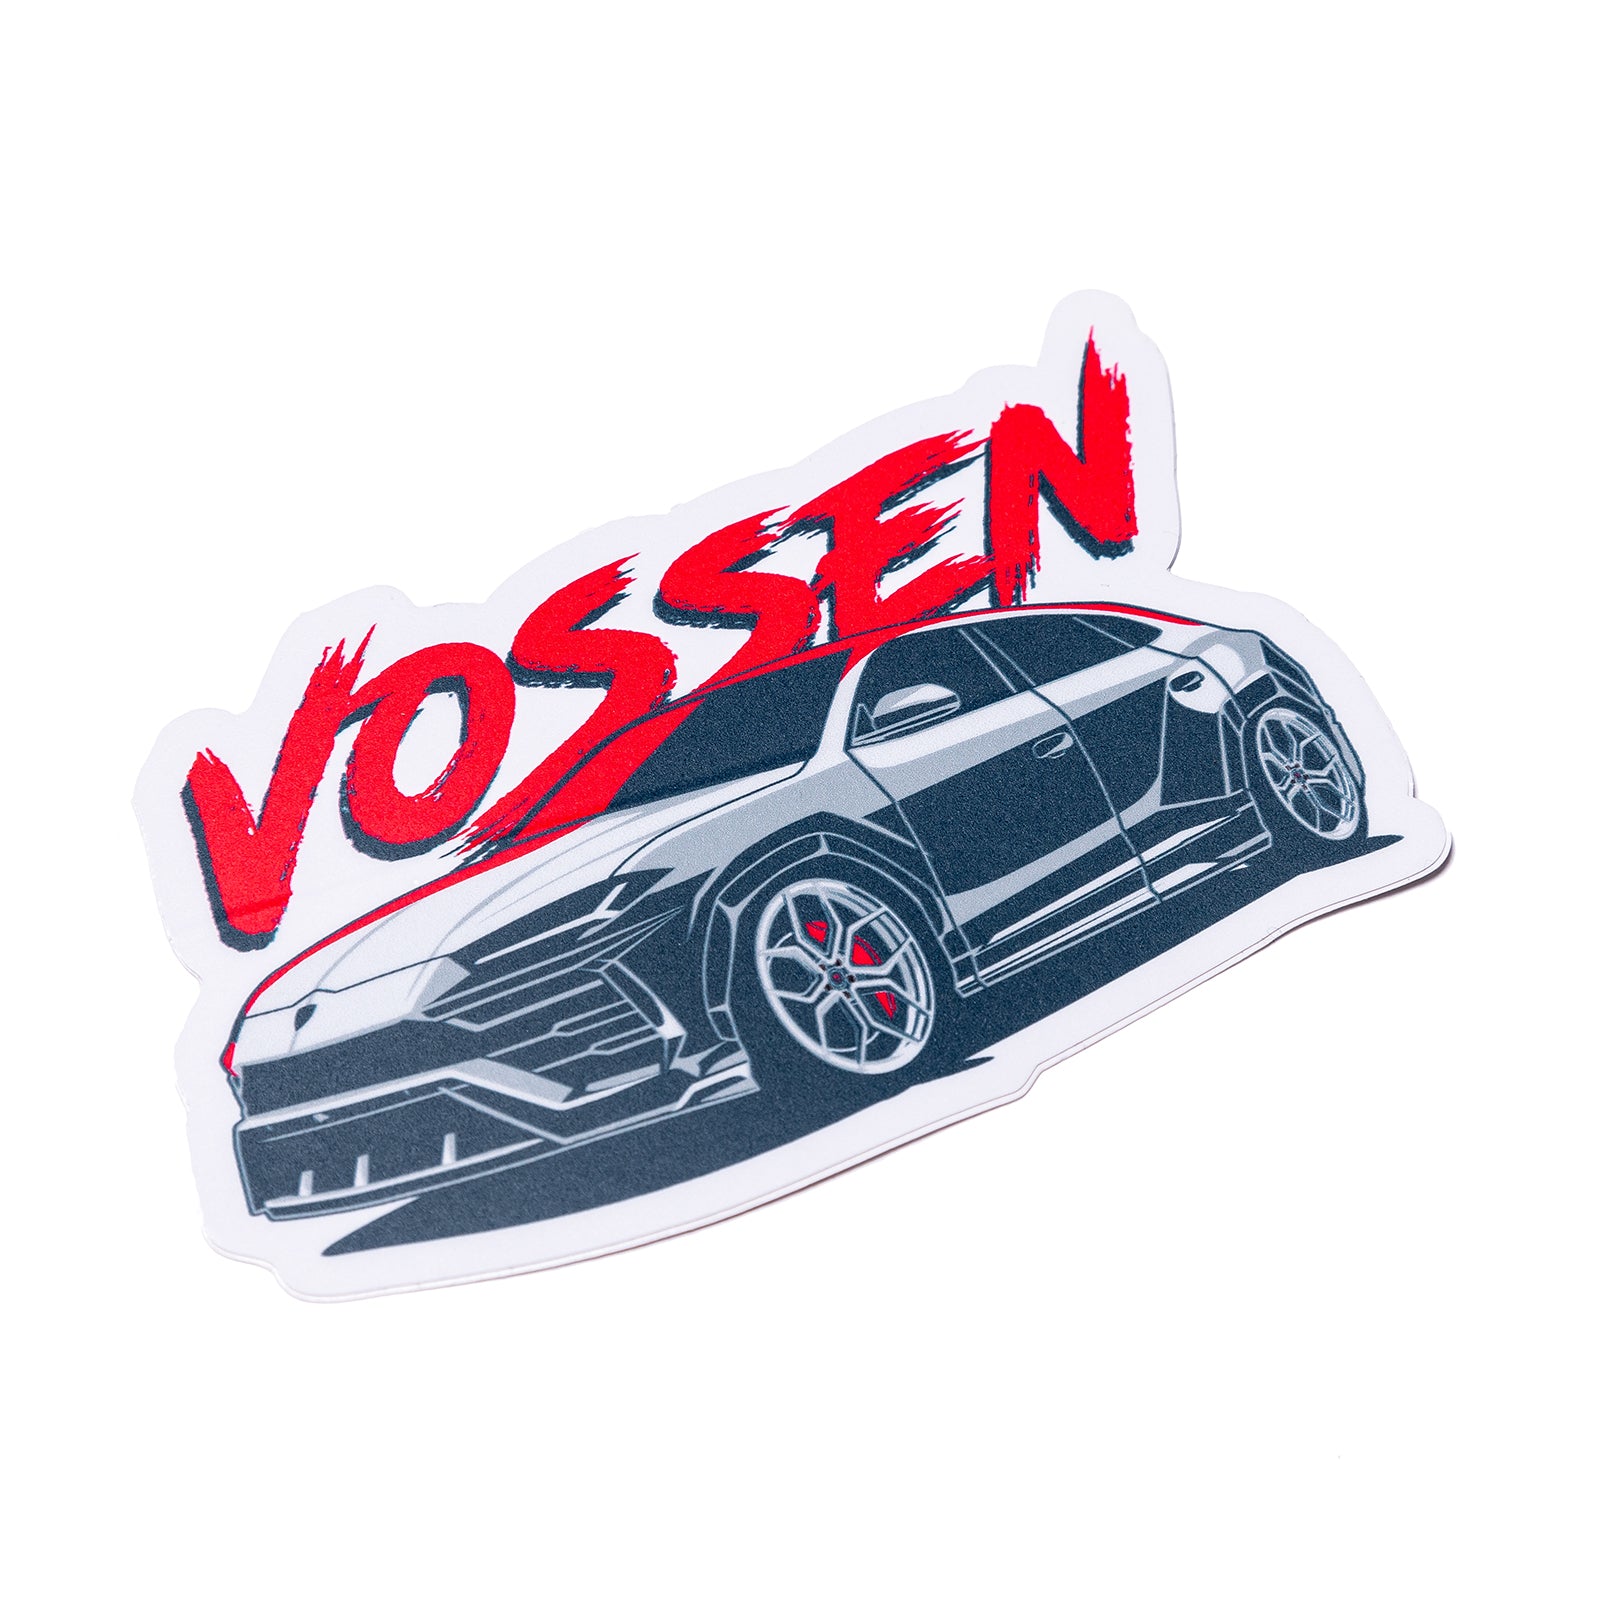 Vossen Wheel Cleaner  Color Changing Wheel Cleaner by Adam's Polishes